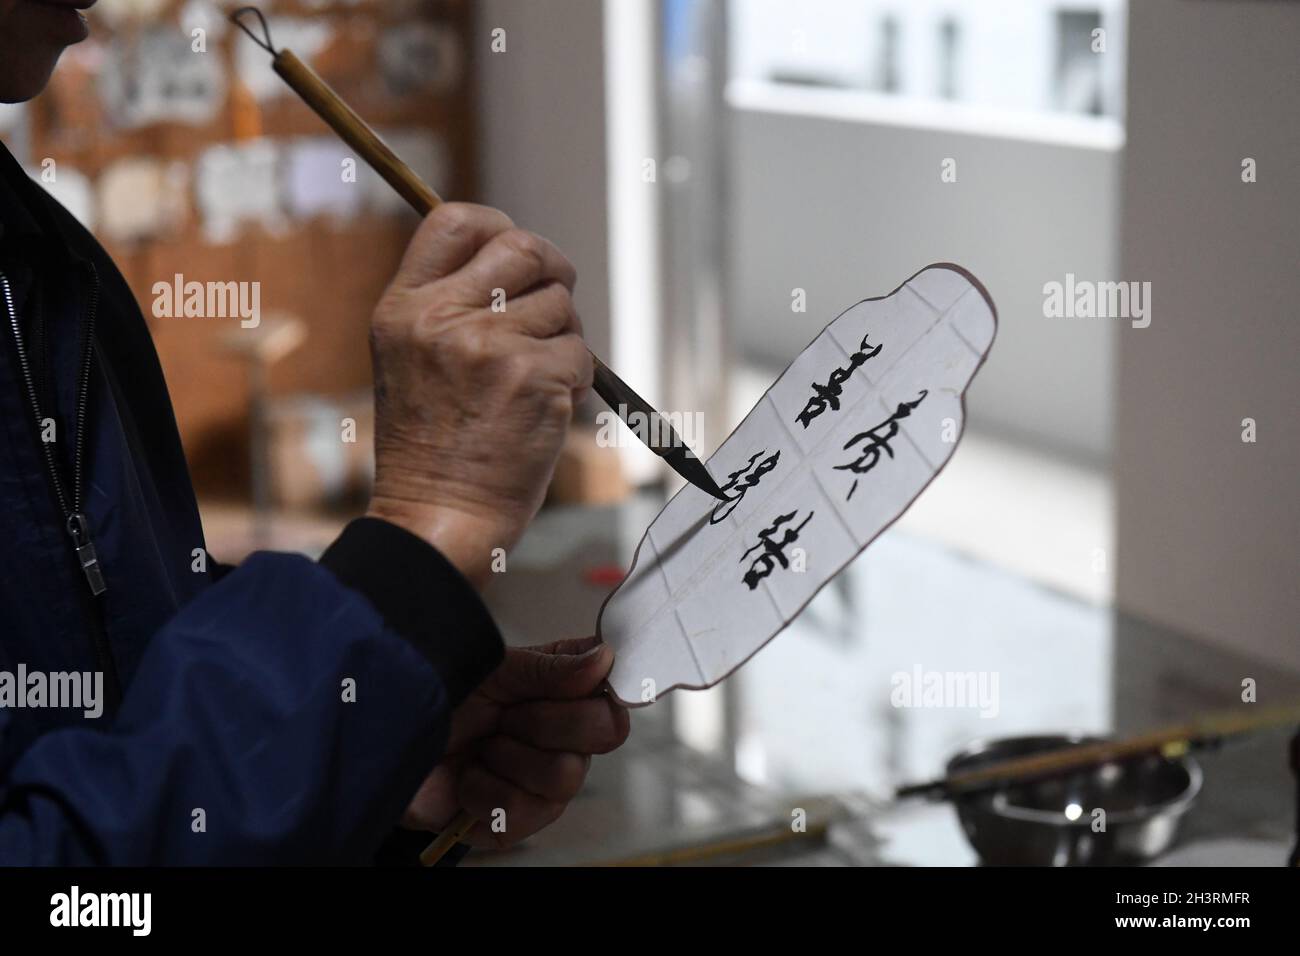 Lingchuan, China. 29th Oct, 2021. (211030) -- LINGCHUAN, Oct. 30, 2021 (Xinhua) -- Huang Shuofu, an inheritor of Guilin bamboo circular fan making technique, writes on a fan in Dingjiang Township of Guilin, south China's Guangxi Zhuang Autonomous Region, Oct. 29, 2021. Making of such a fan is not a simple task, craftsmen cut the soaked bamboo into dozens of strips to make fan frame, paste the surface with Xuan paper, cotton cloth and silk, finally make the circular fan through cutting and edge wrapping, and a good painting and/or calligraphic writing makes it a popular item in the cultural mar Stock Photo